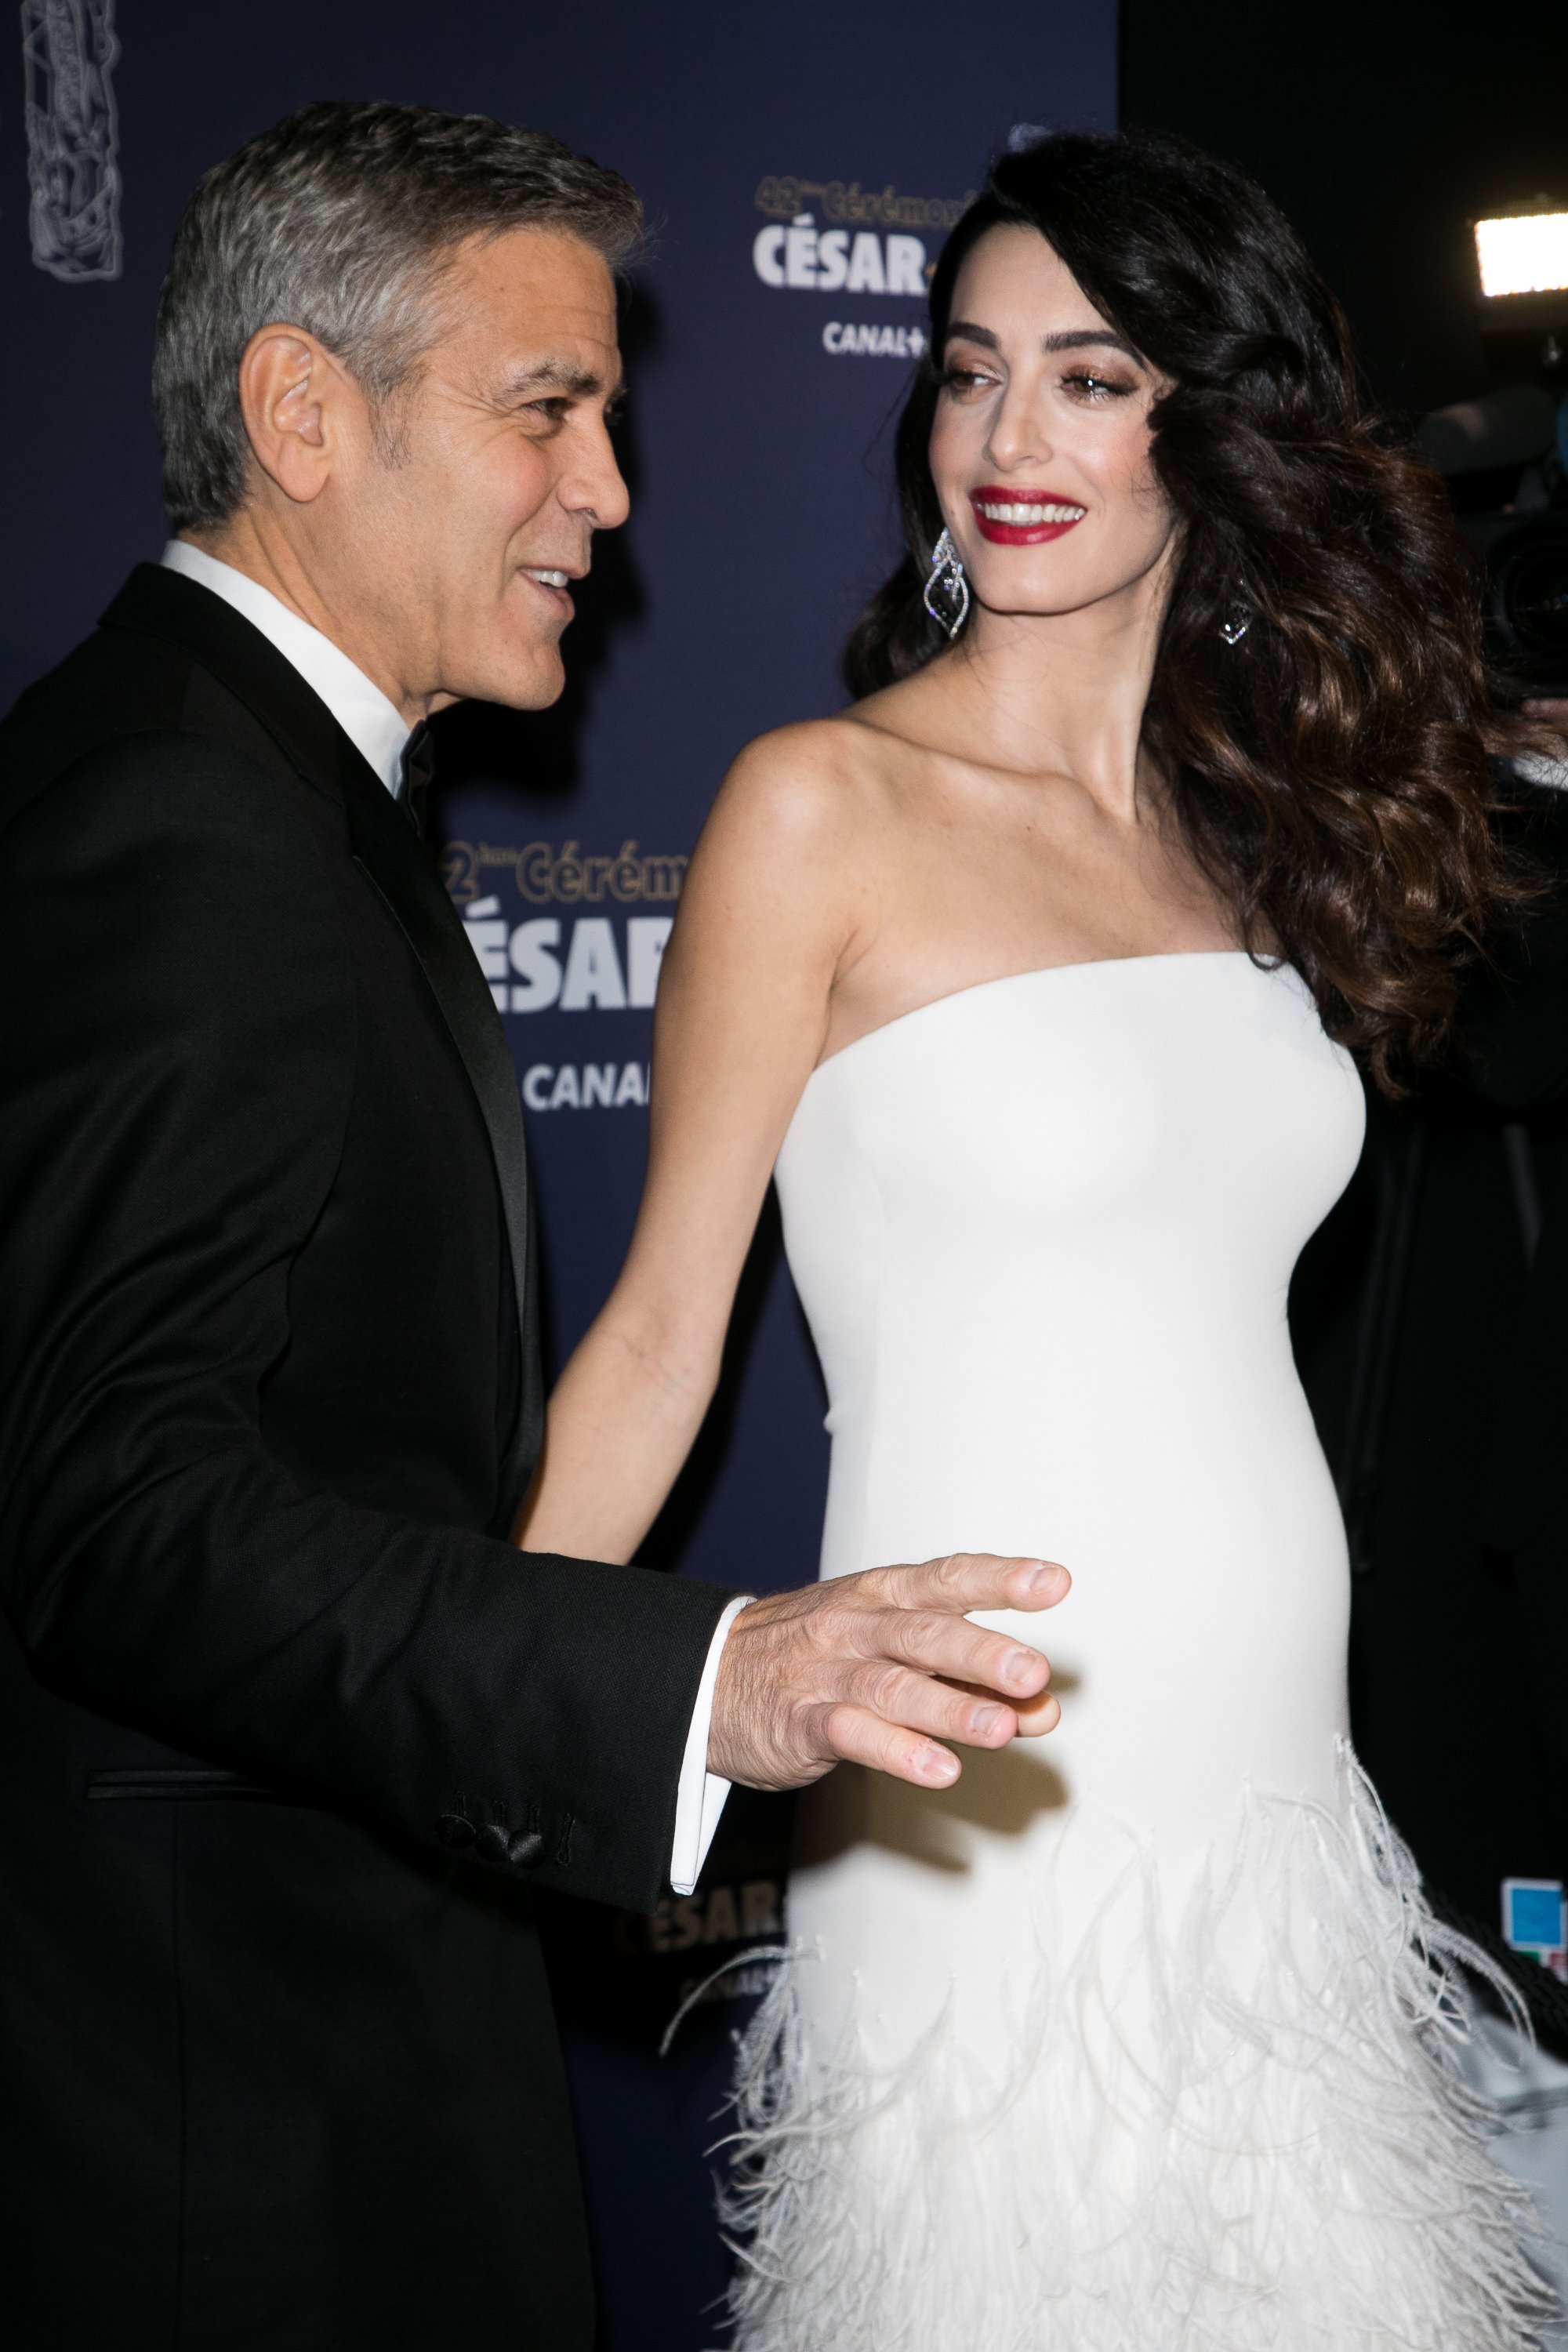 George and Amal Clooney at the Cesar Film Awards ceremony at Salle Pleyel on February 24, 2017, in Paris, France. | Source: Getty Images